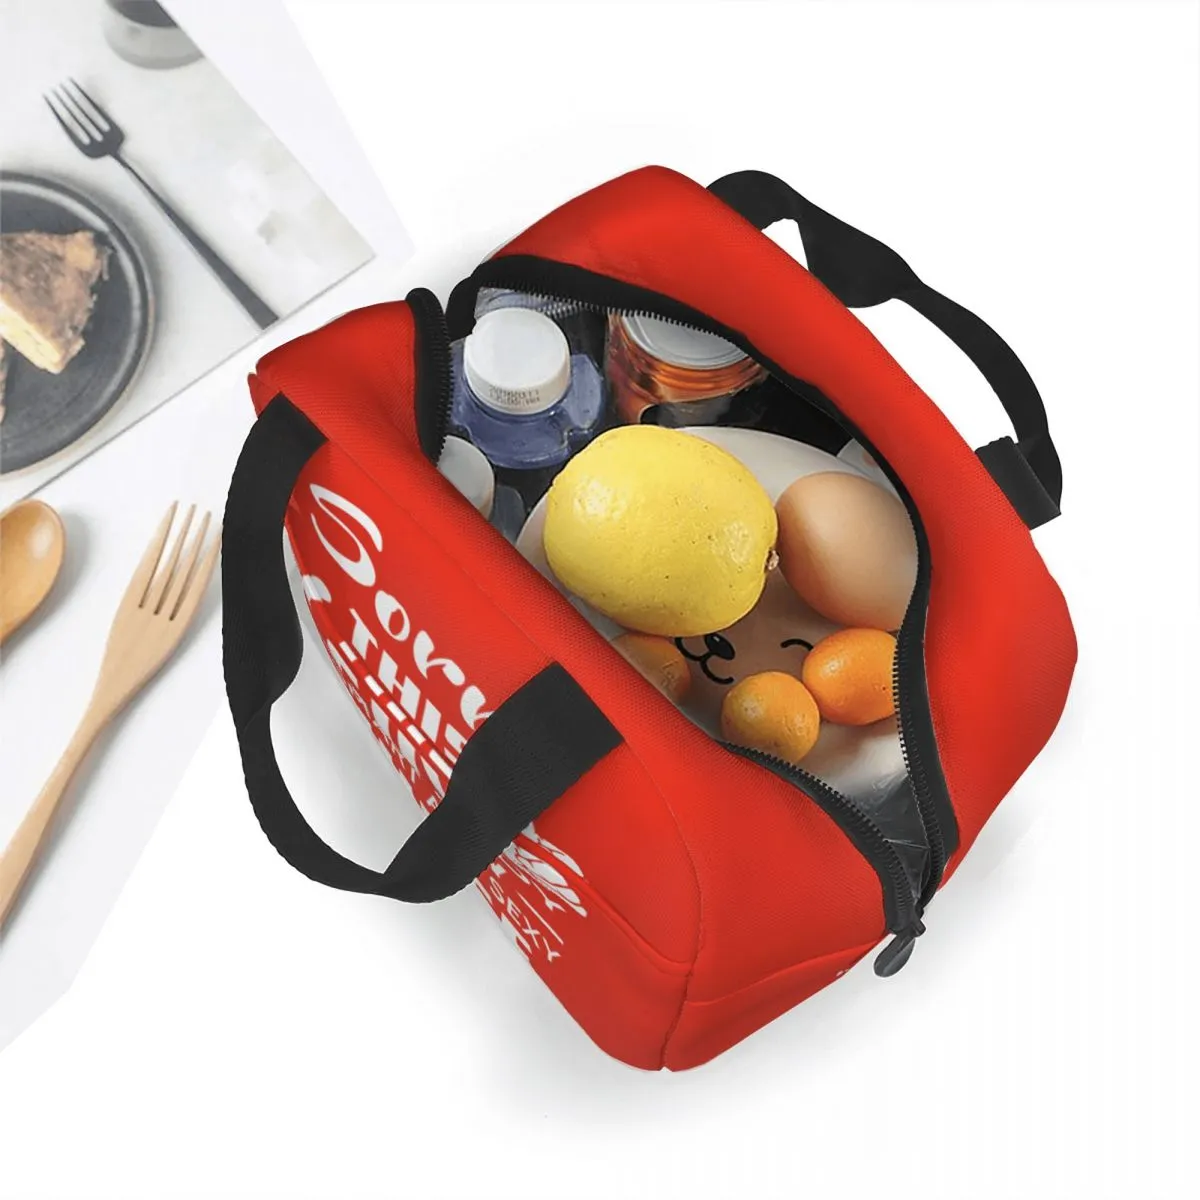 Nurse Insulated Lunch Bags Cooler Bag Lunch Container Boyfriend Fiance Husband Leakproof Lunch Box Tote Food Bag School Outdoor